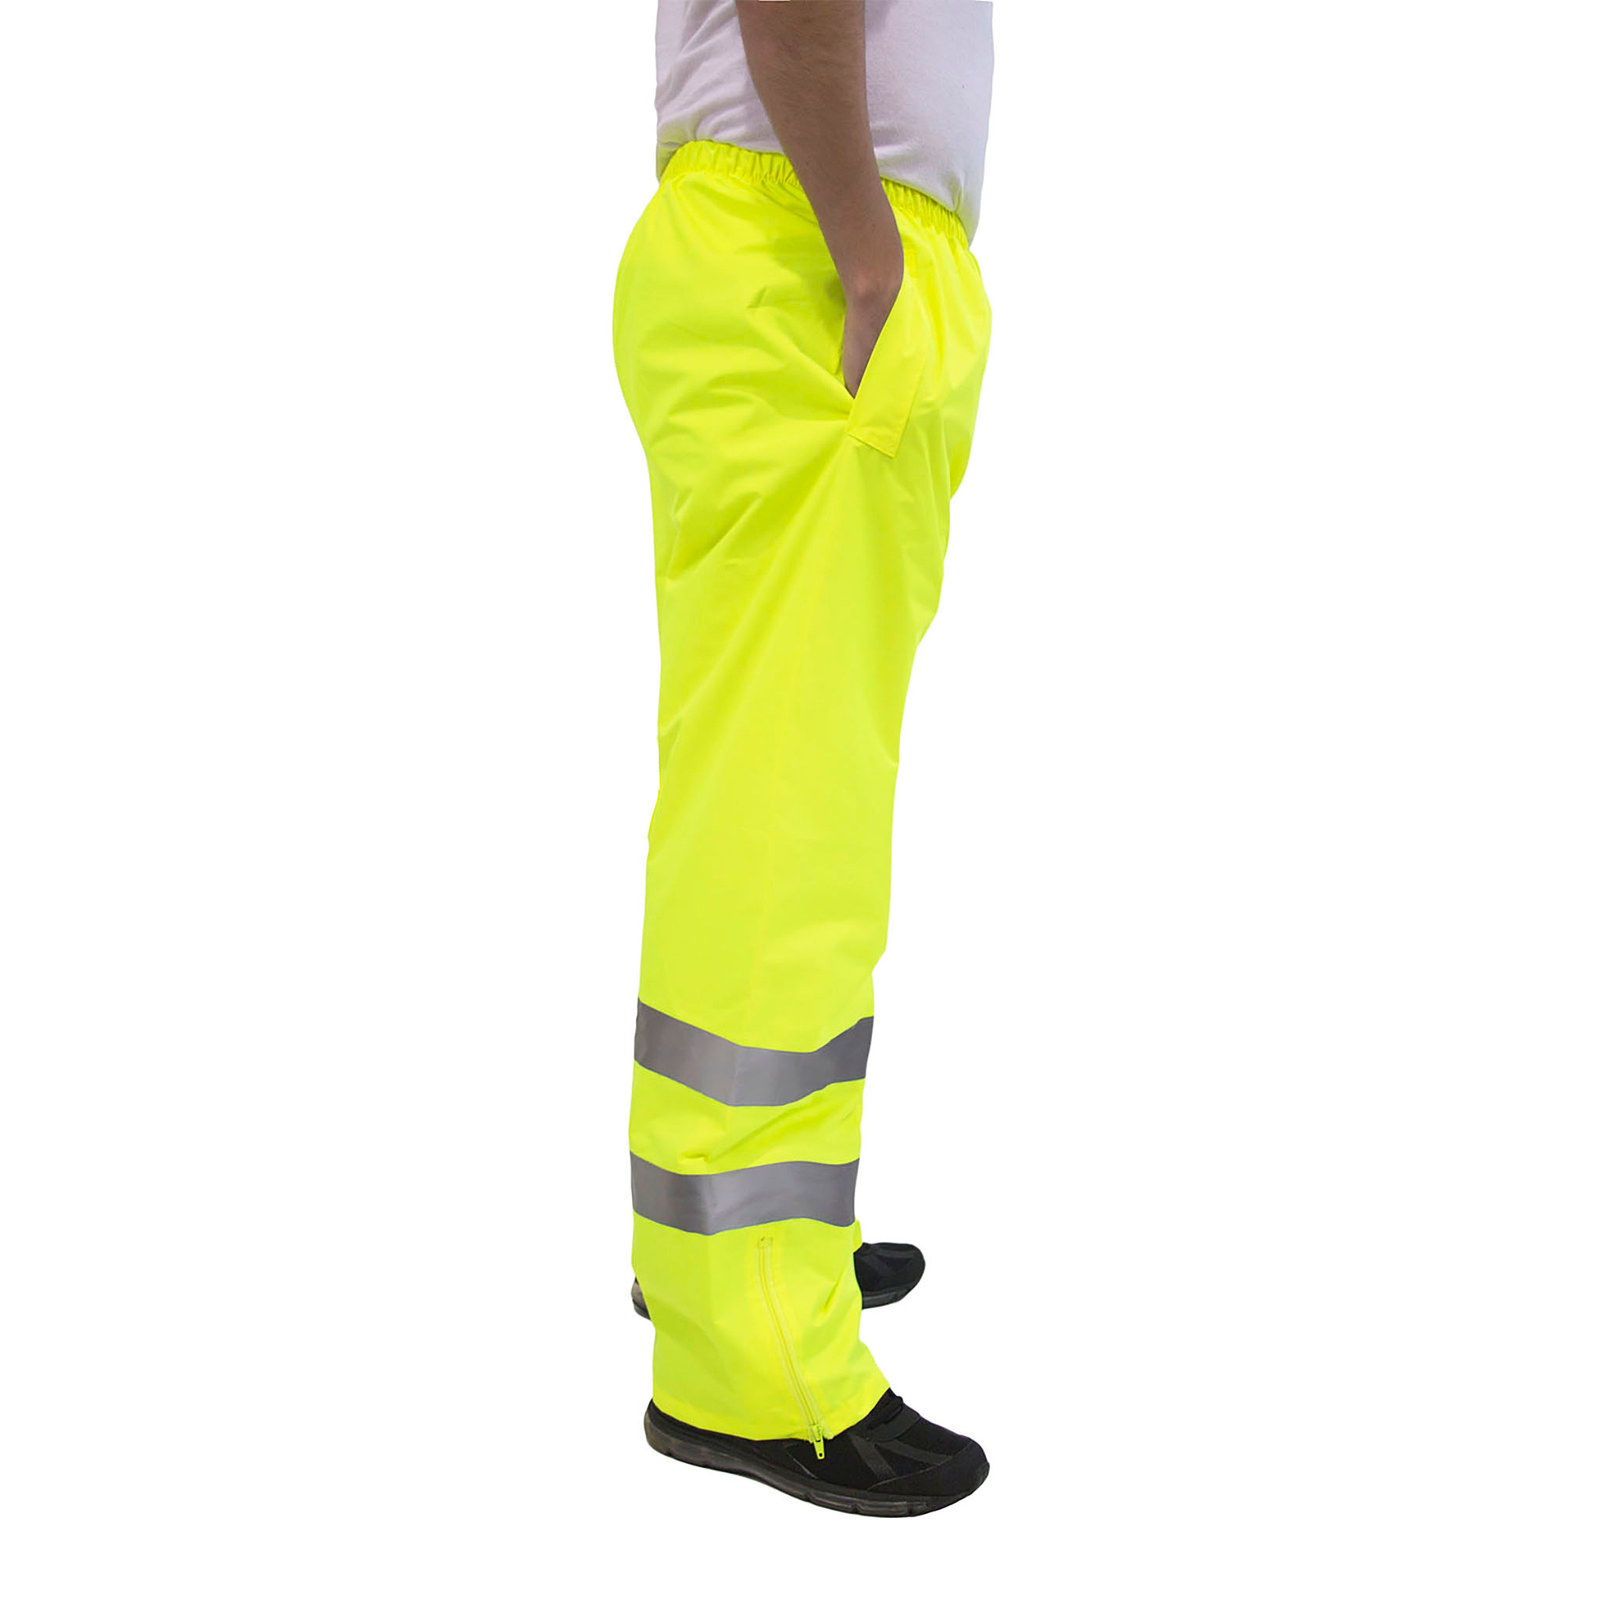 Showing a person wearing the High Visibility rain pants